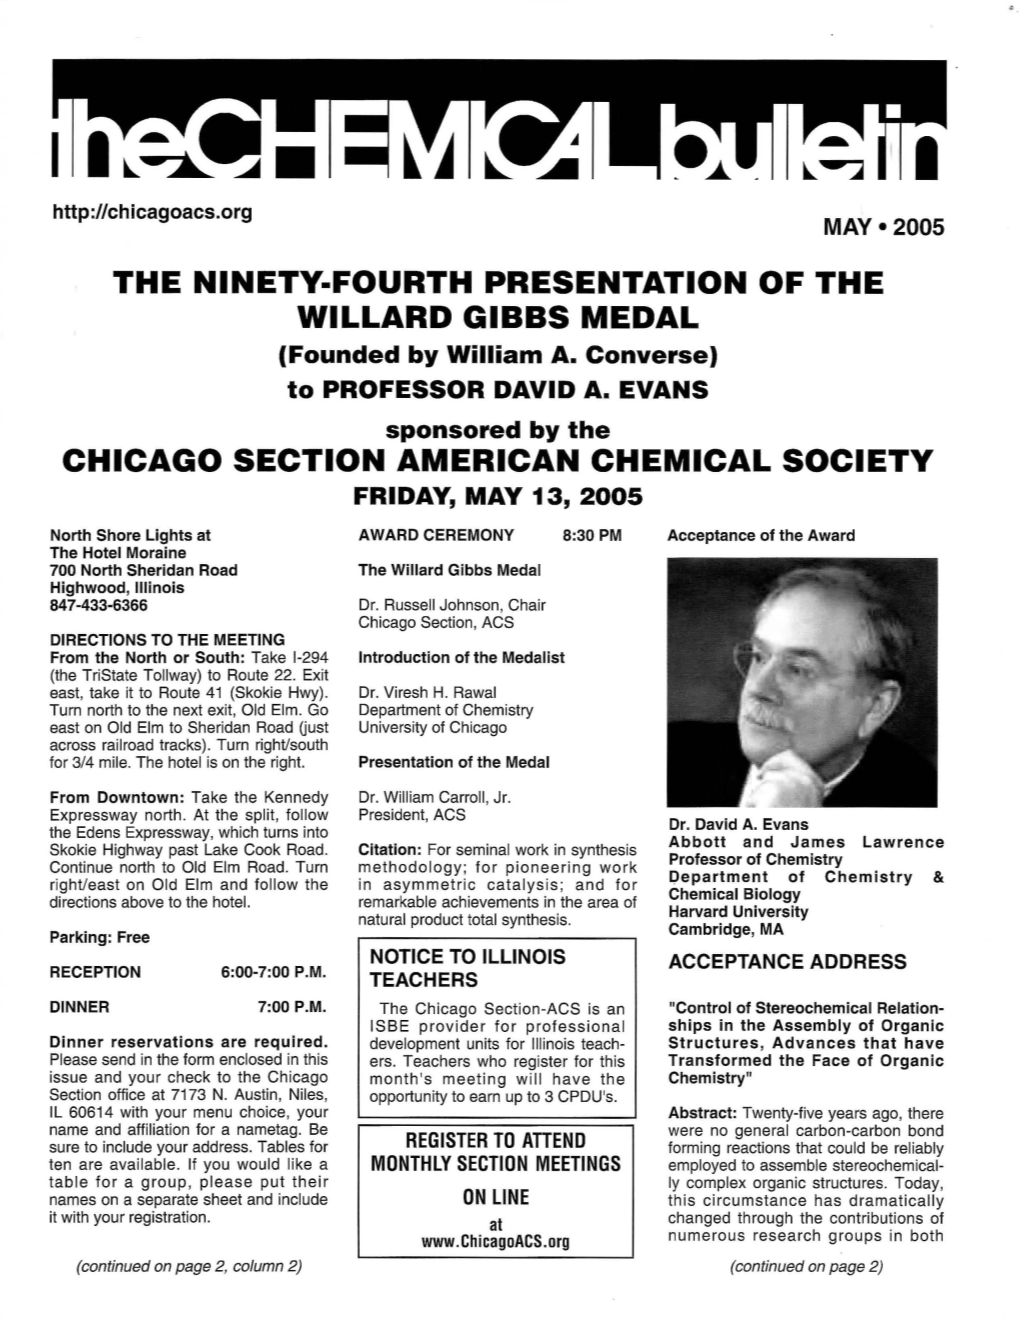 THE NINETY-FOURTH PRESENTATION of the WILLARD GIBBS MEDAL (Founded by William A